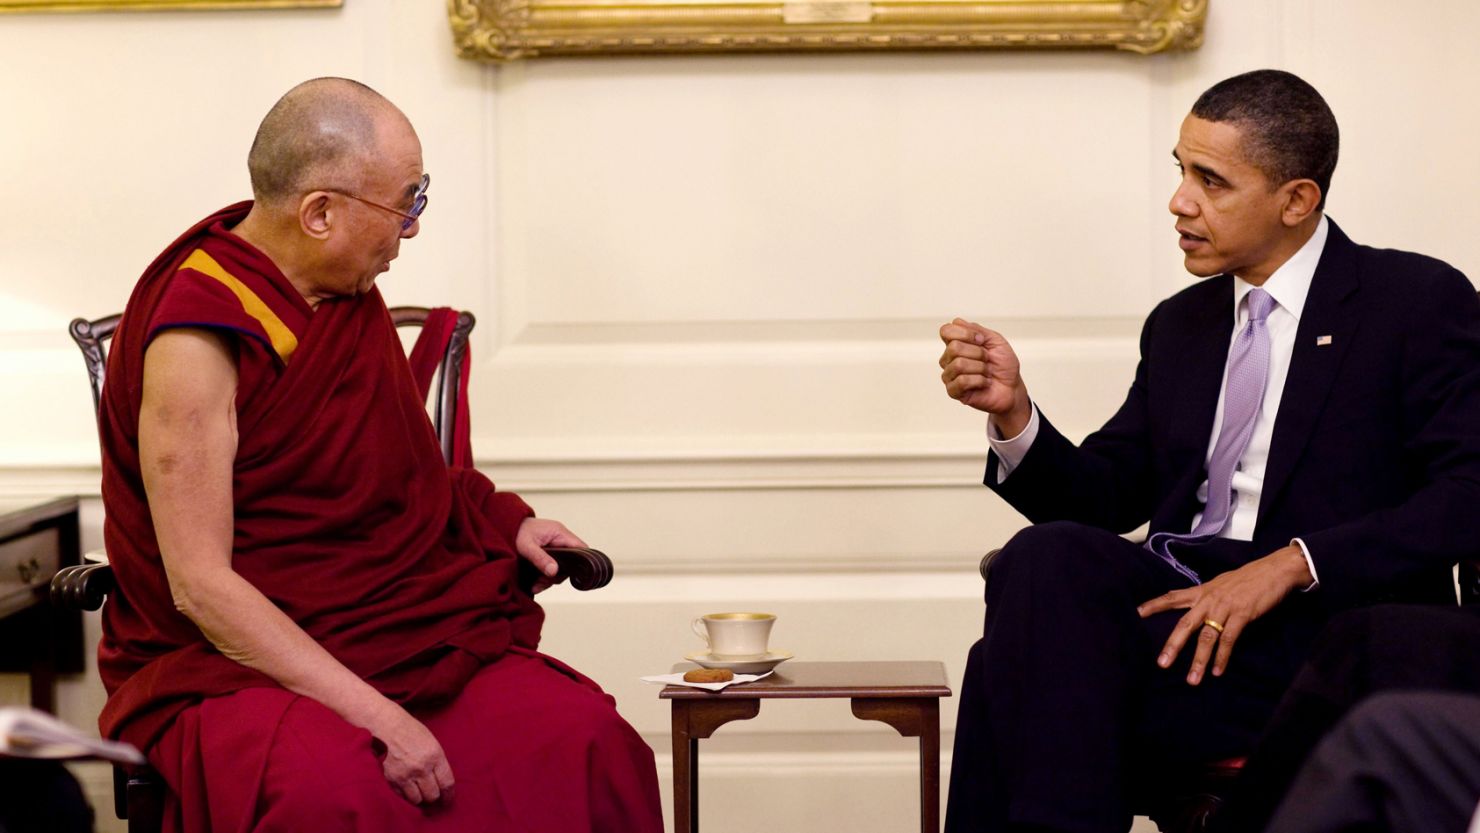 President Barack Obama meets with His Holiness the Dalai Lama in the Map Room of the White House, February 18, 2010.
